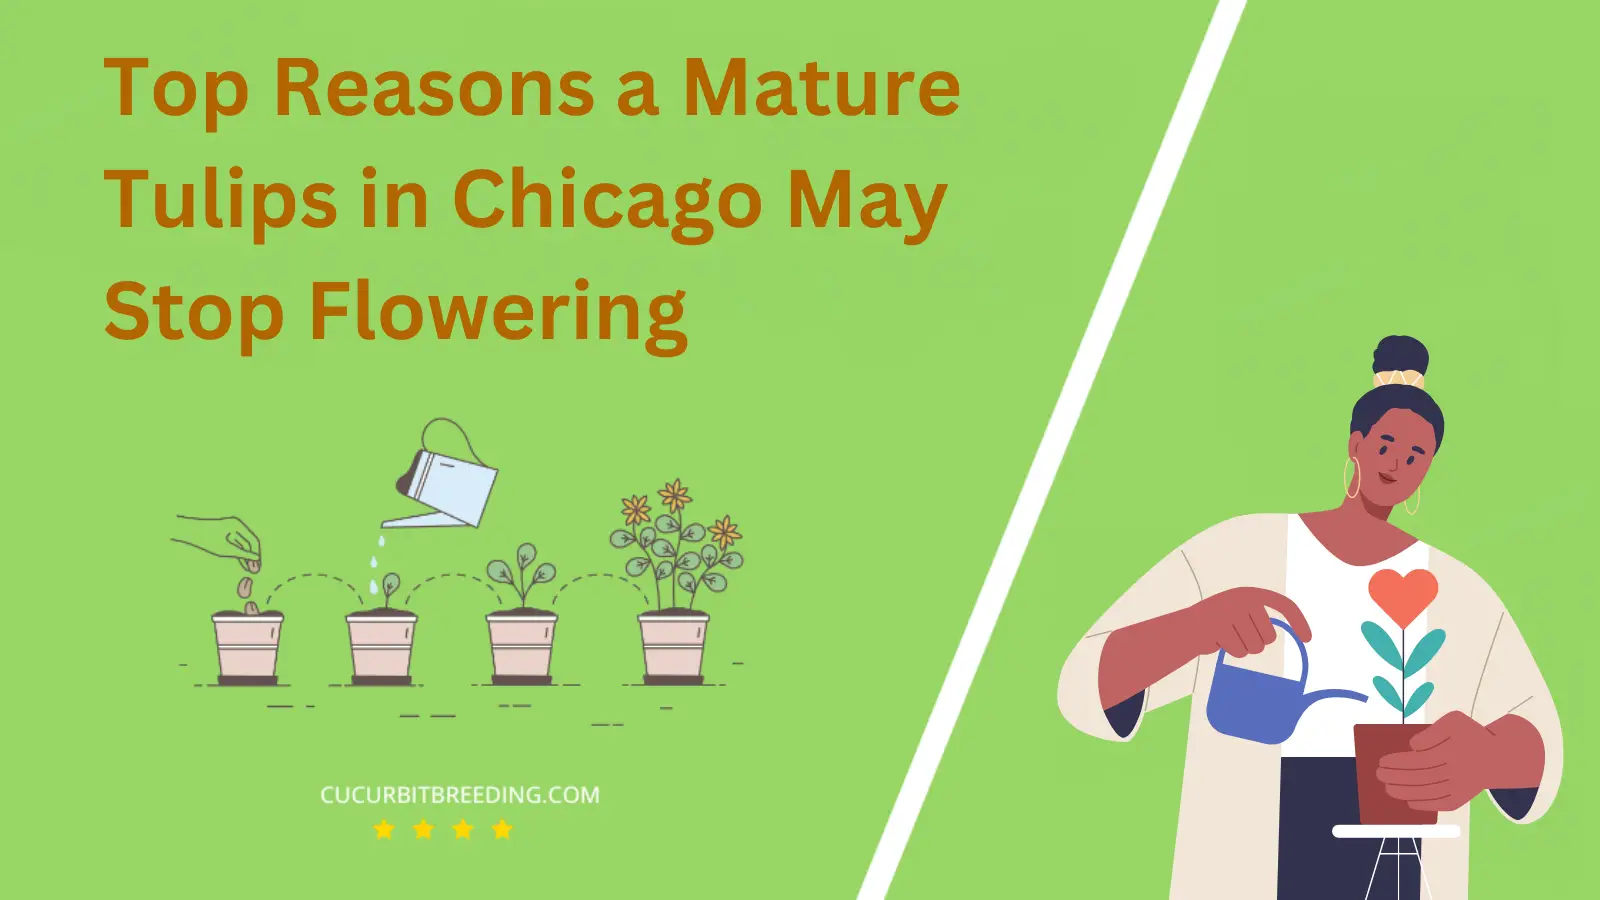 Top Reasons a Mature Tulips in Chicago May Stop Flowering